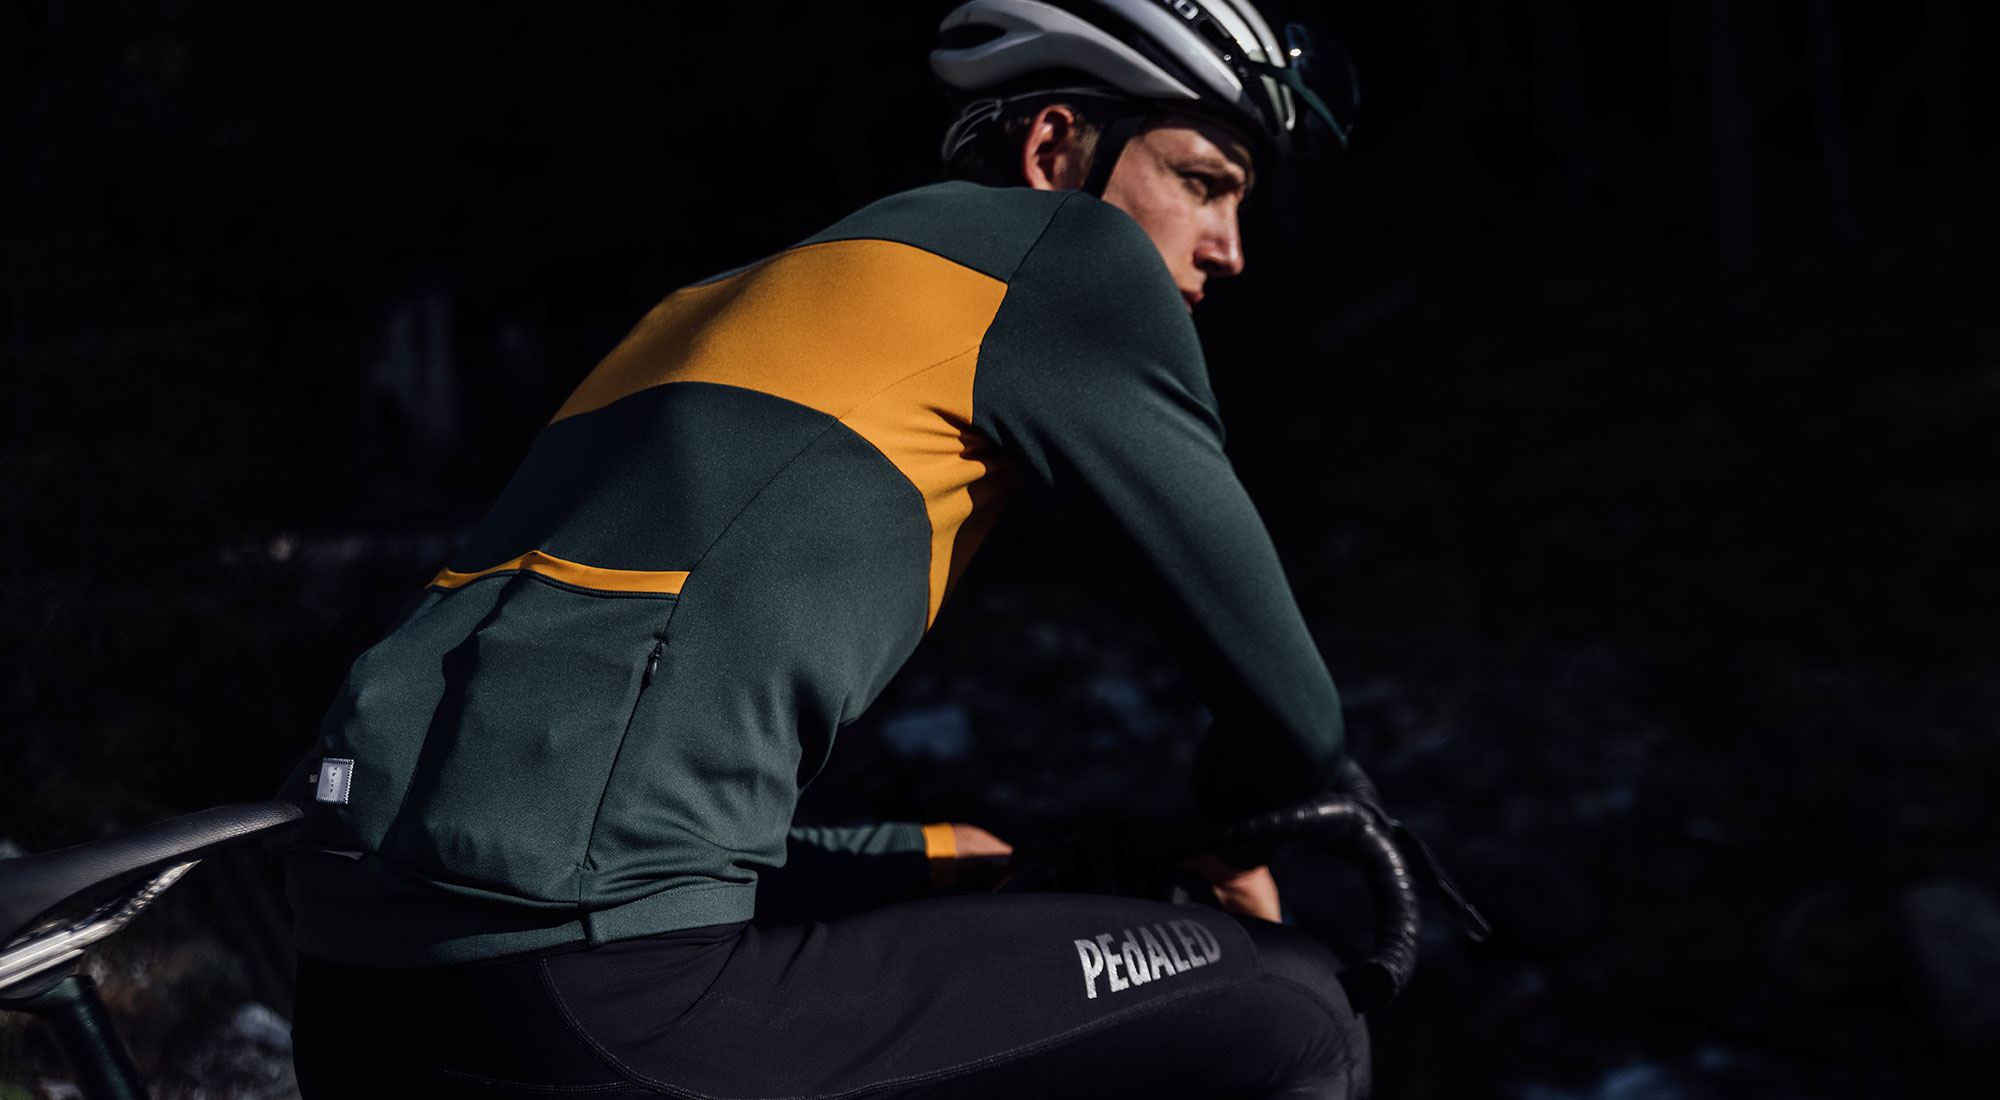 pedaled-essential-merino-long-sleeve-cycling-jersey-2